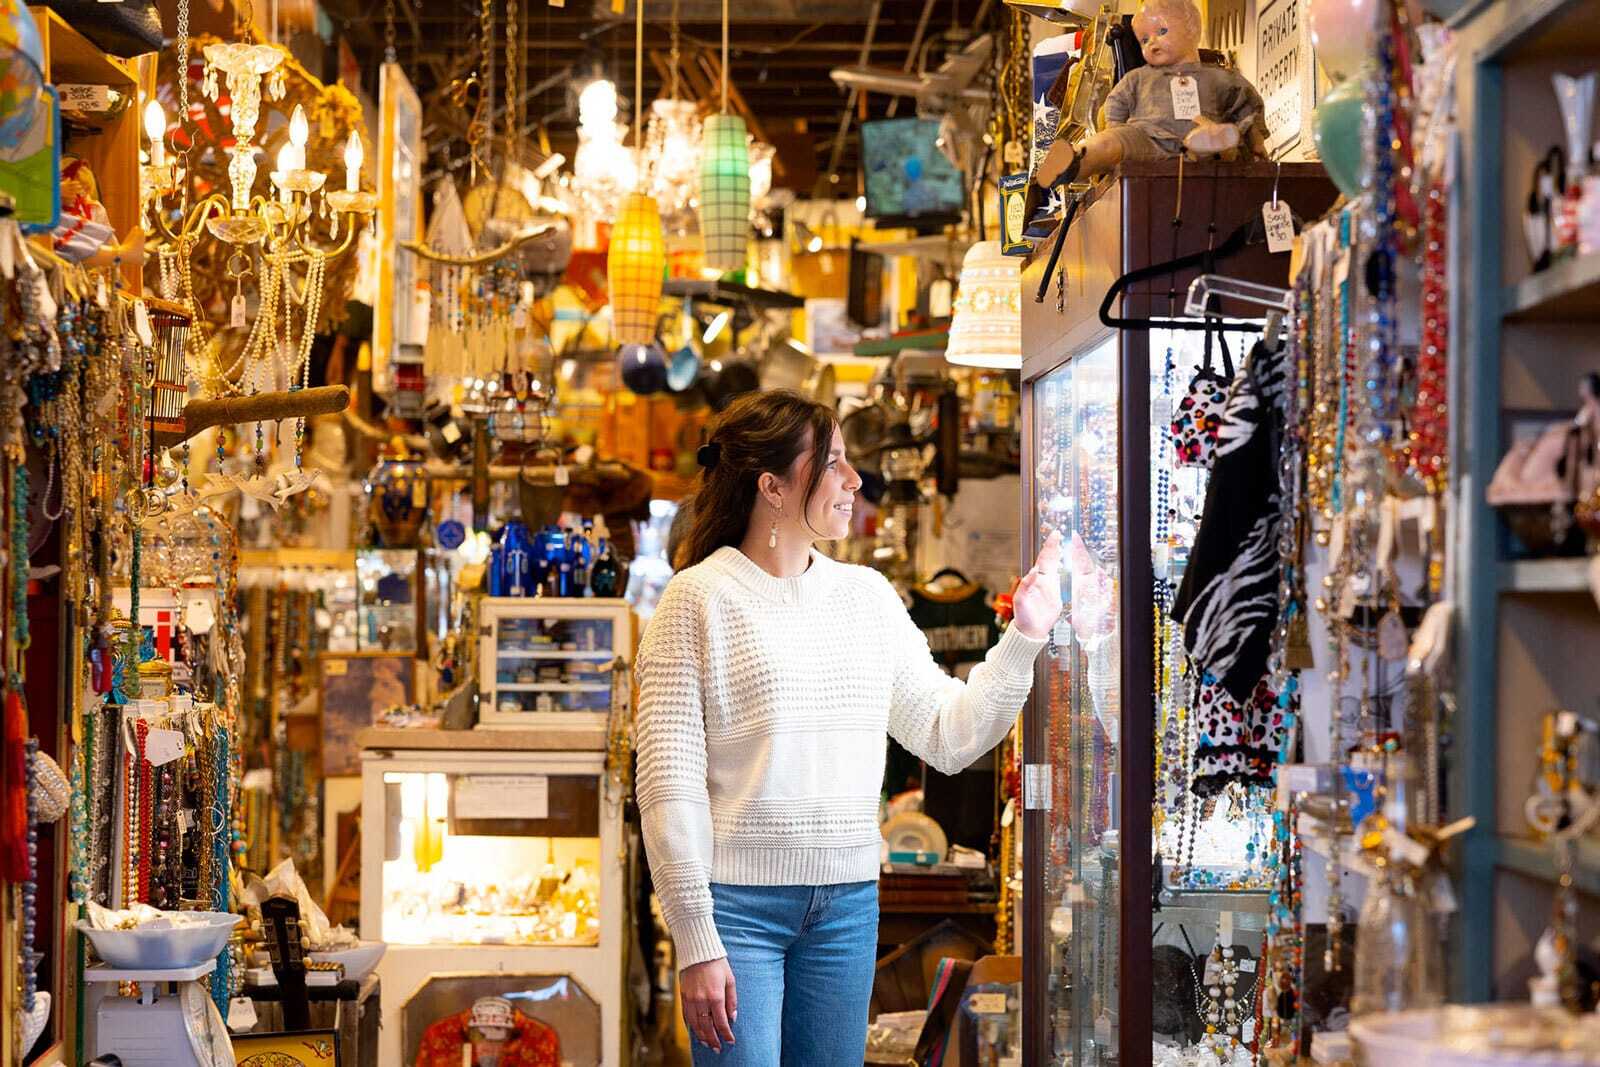 A woman is looking through a crowded and eclectic antique store. There are even antiques hanging form the ceiling.